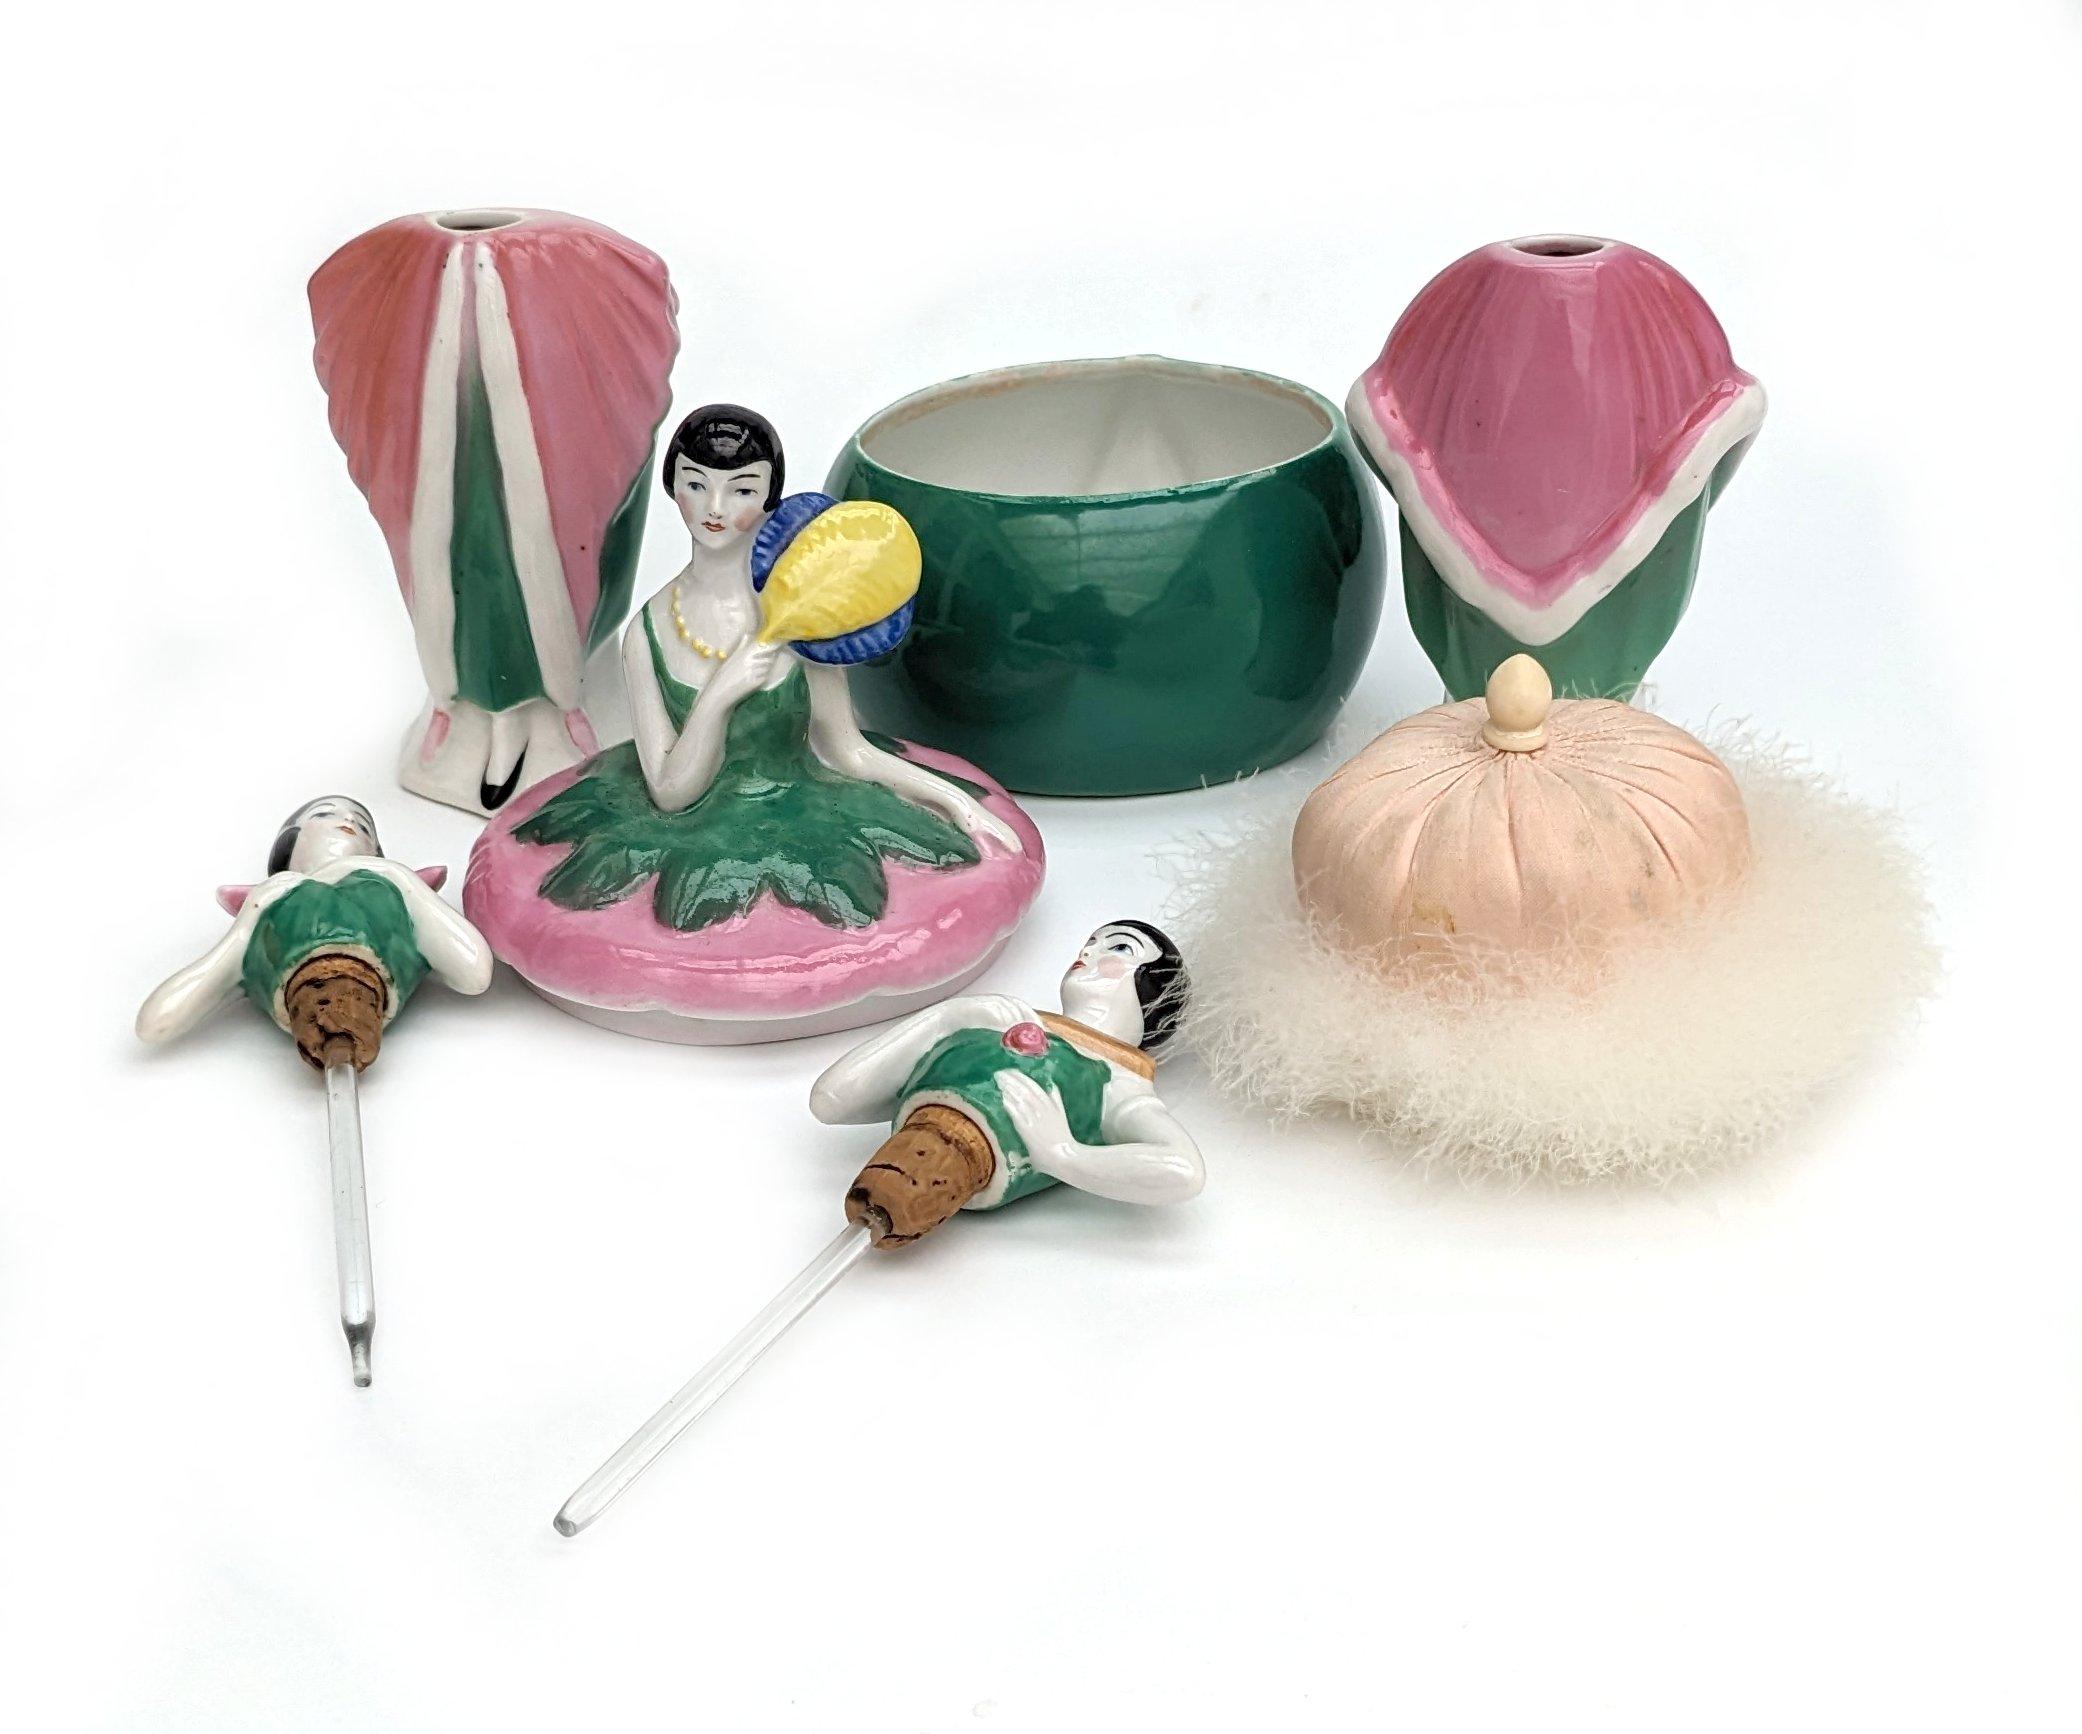 First time we've had one of these so quite a rare find and in superb condition is this wonderful 1930's Art Deco German half doll related ladies perfume vanity set . Two perfume bottles with glass daubers in tact. Powder jar with original powder